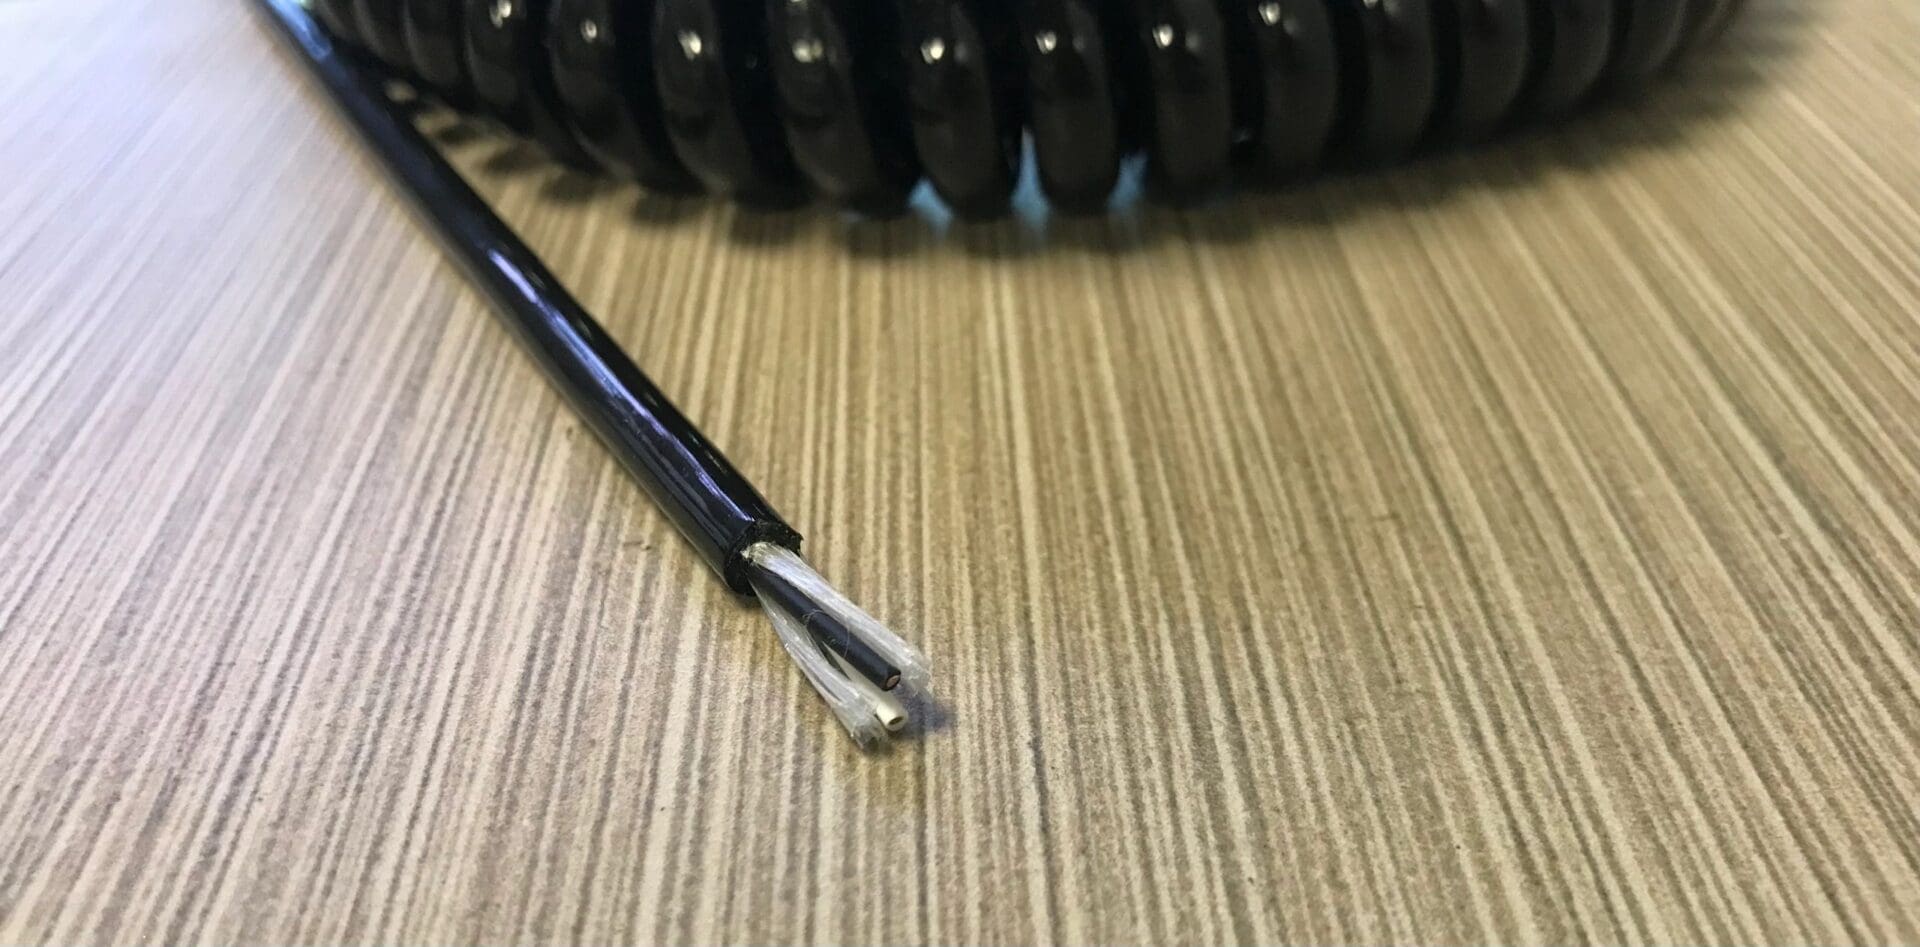 A black coiled wire on top of a table.